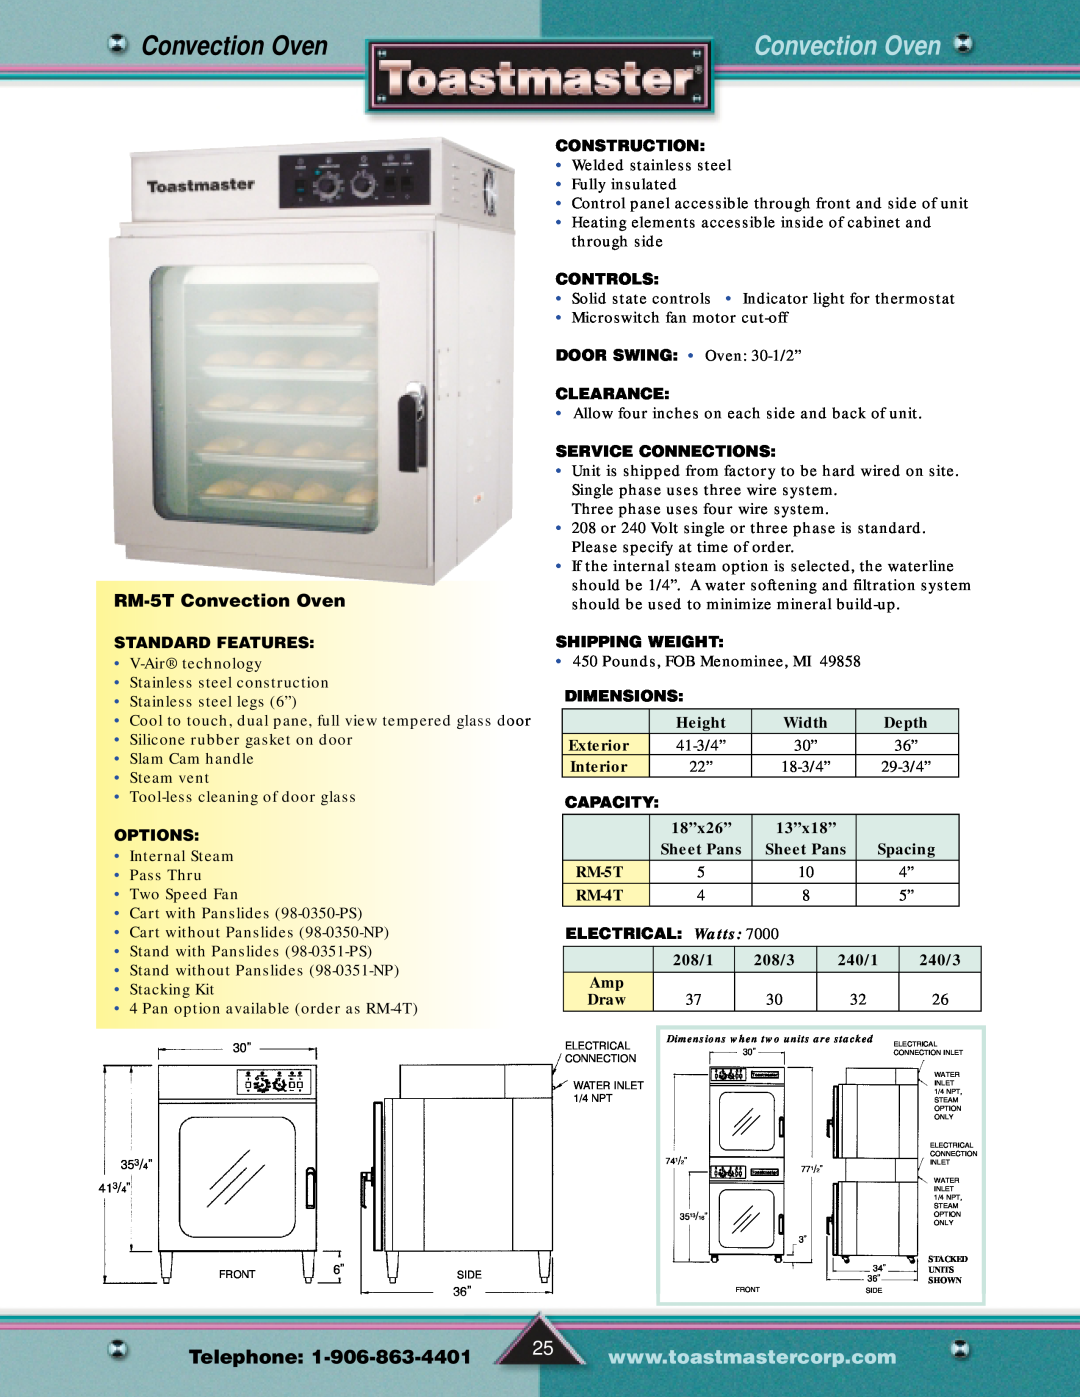 Toastmaster Gas & Electric Fryer manual RM-5T Convection Oven, Telephone, RM-4T 